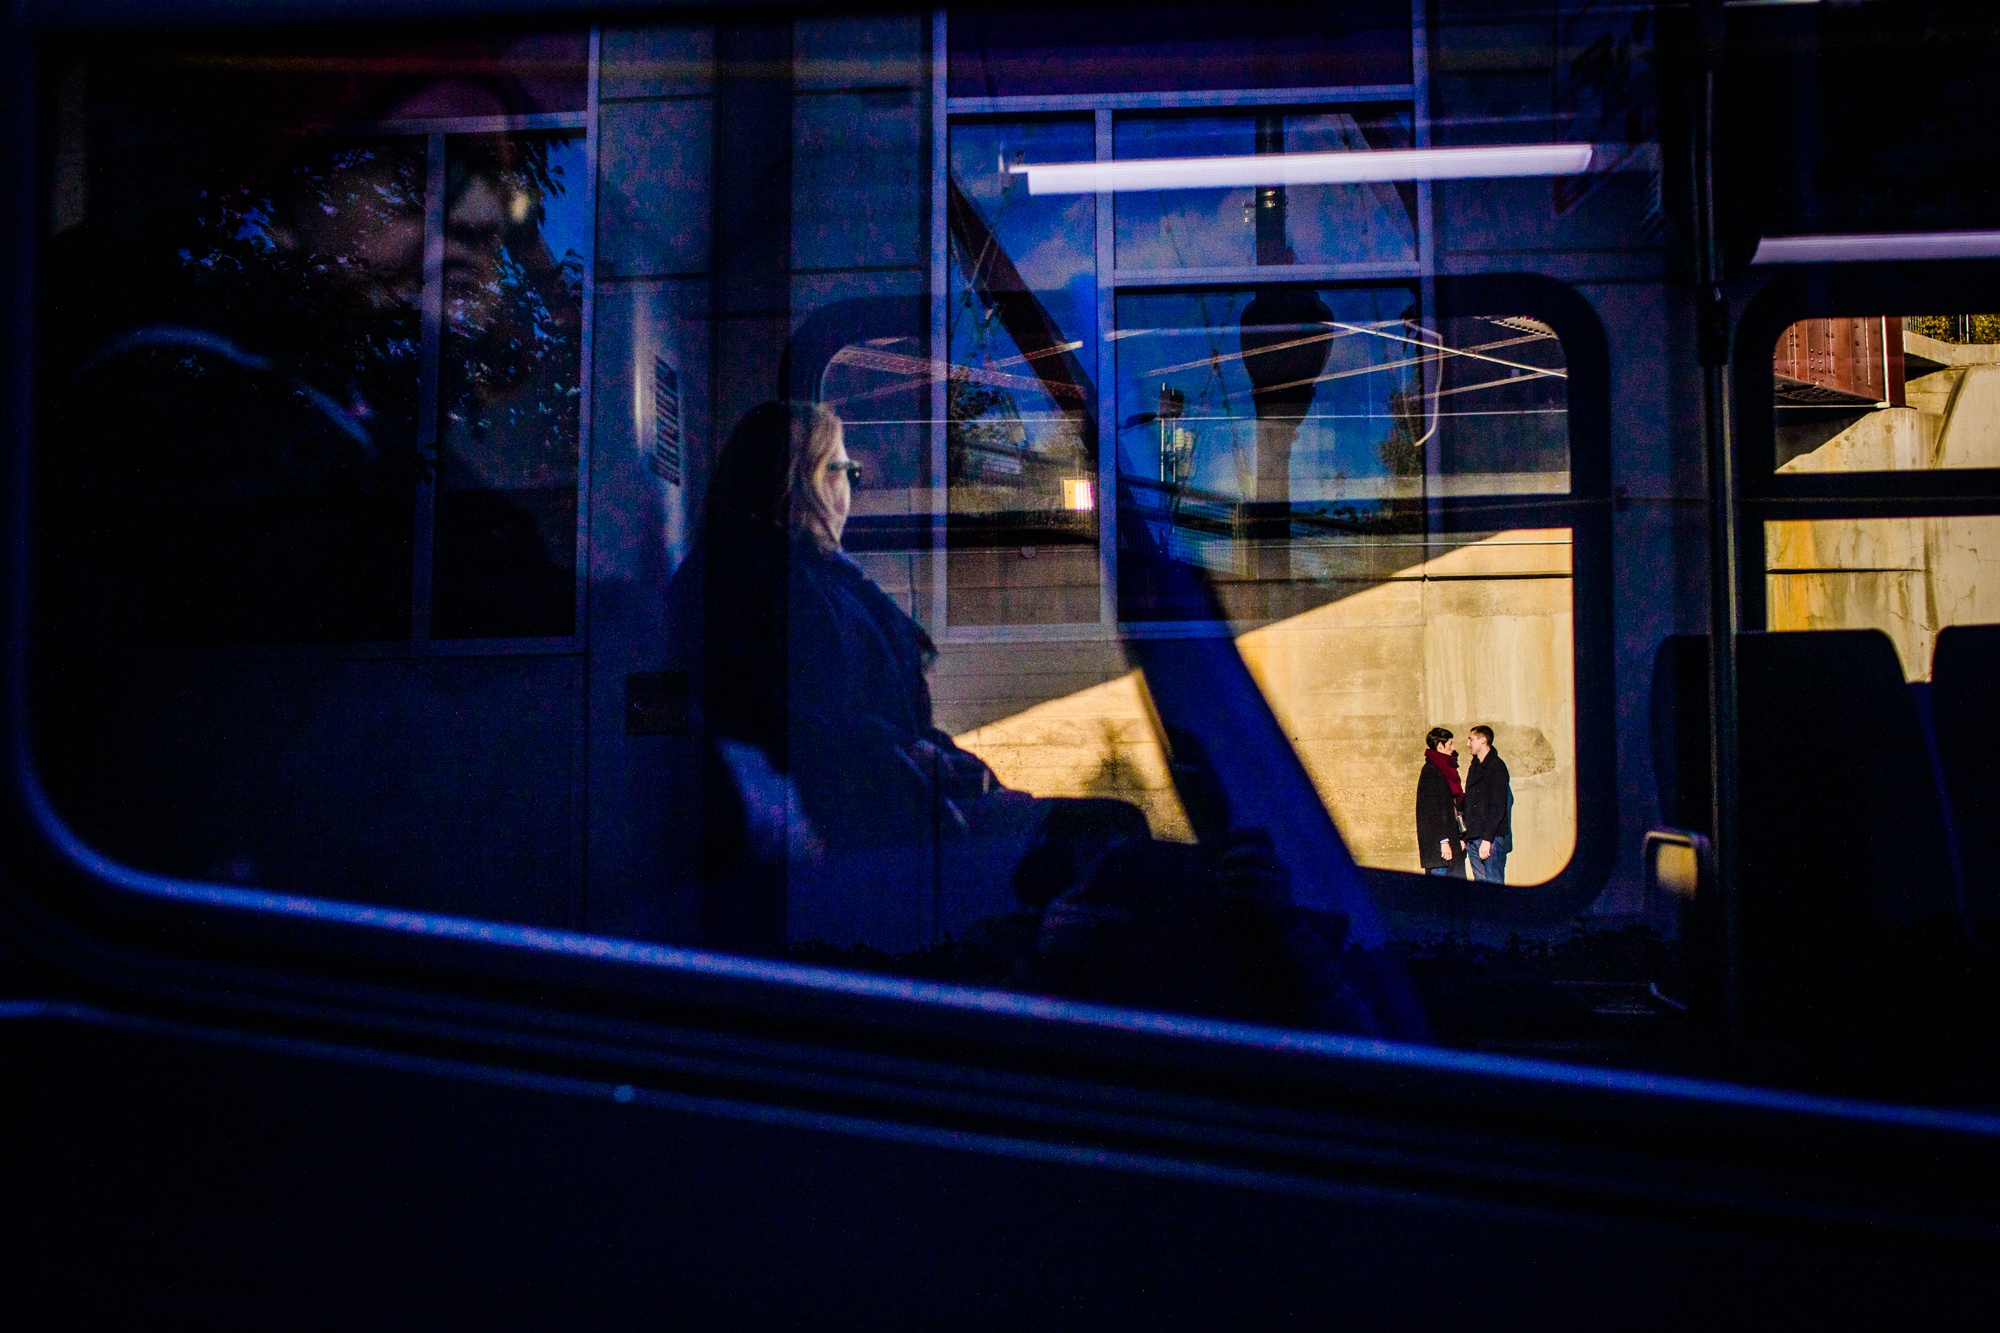 A couple framed in a bus window during a Wicker Park engagement session